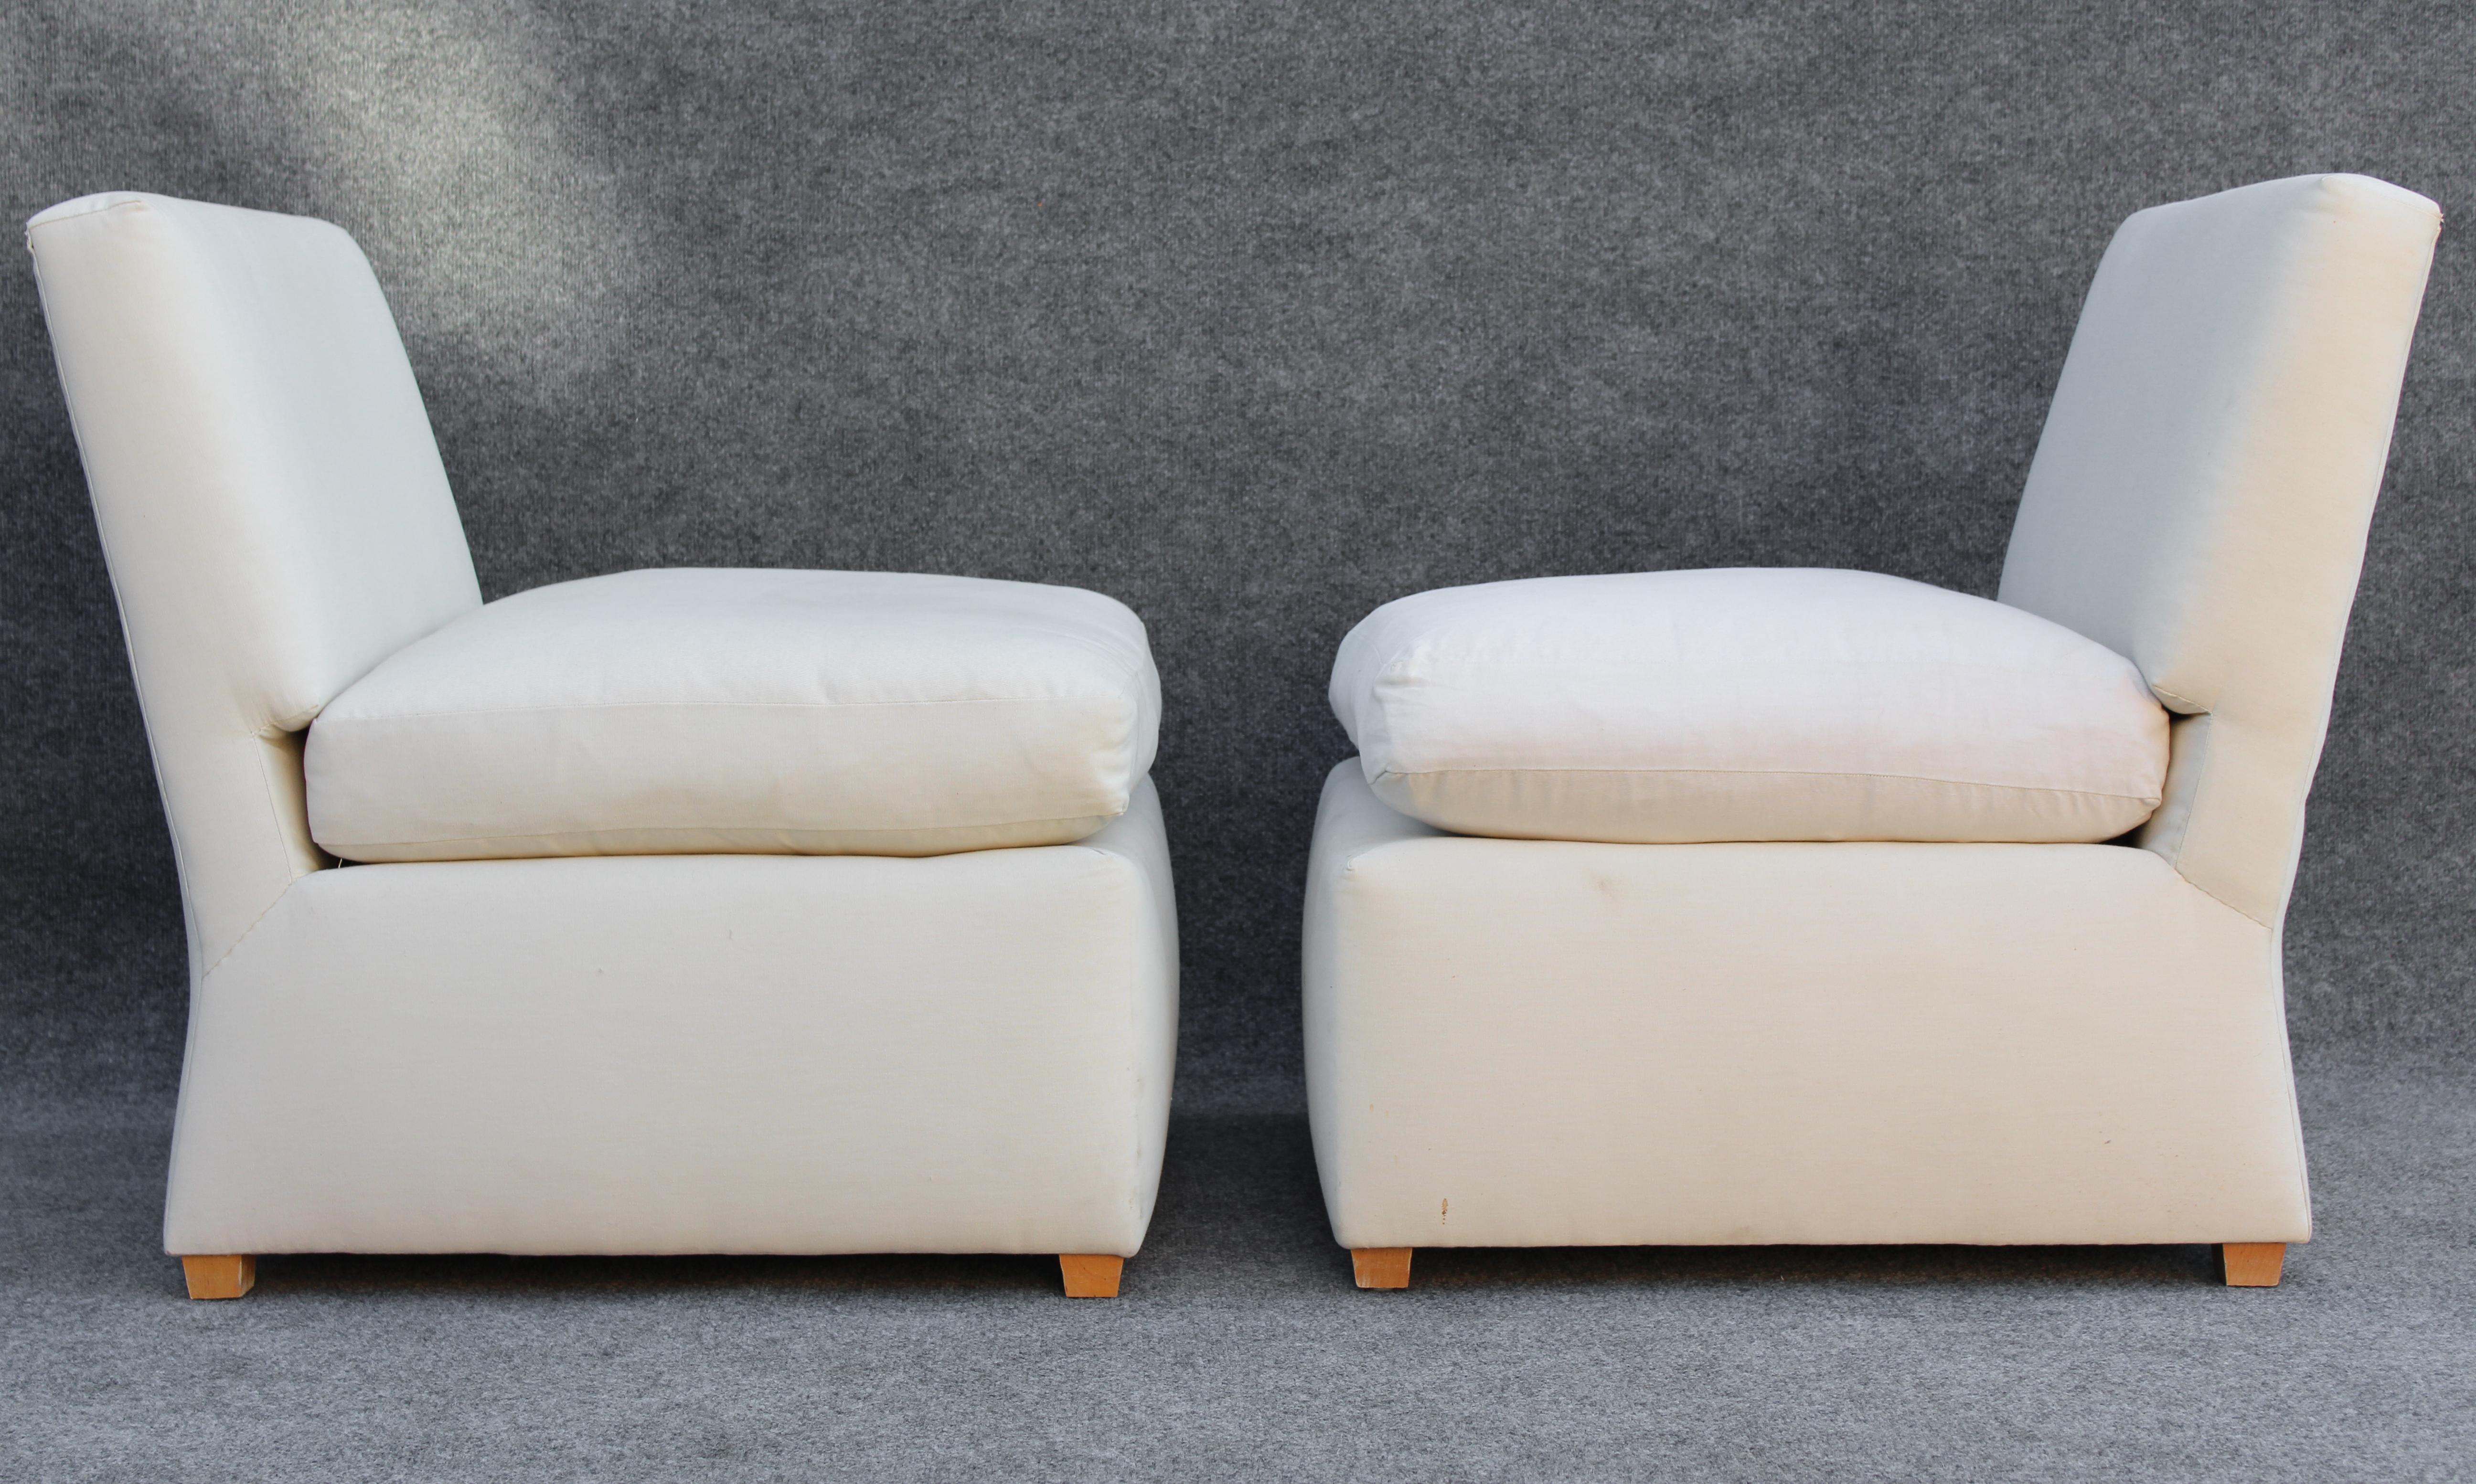 Upholstery Pair of Signed Billy Baldwin White Upholstered Postmodern Slipper Lounge Chairs 